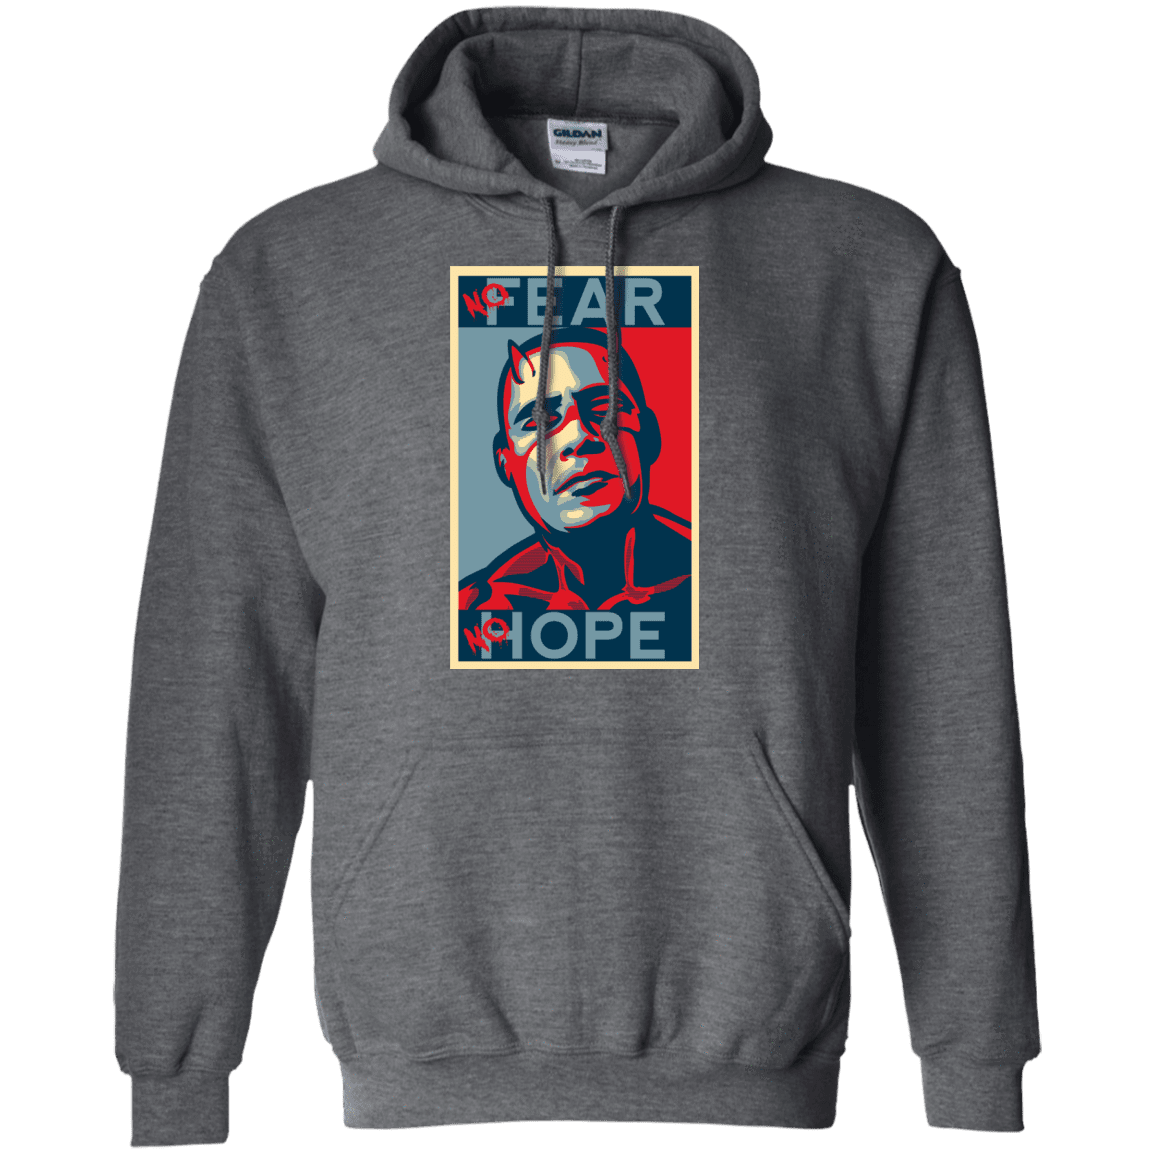 Sweatshirts Dark Heather / Small A man with no fear Pullover Hoodie